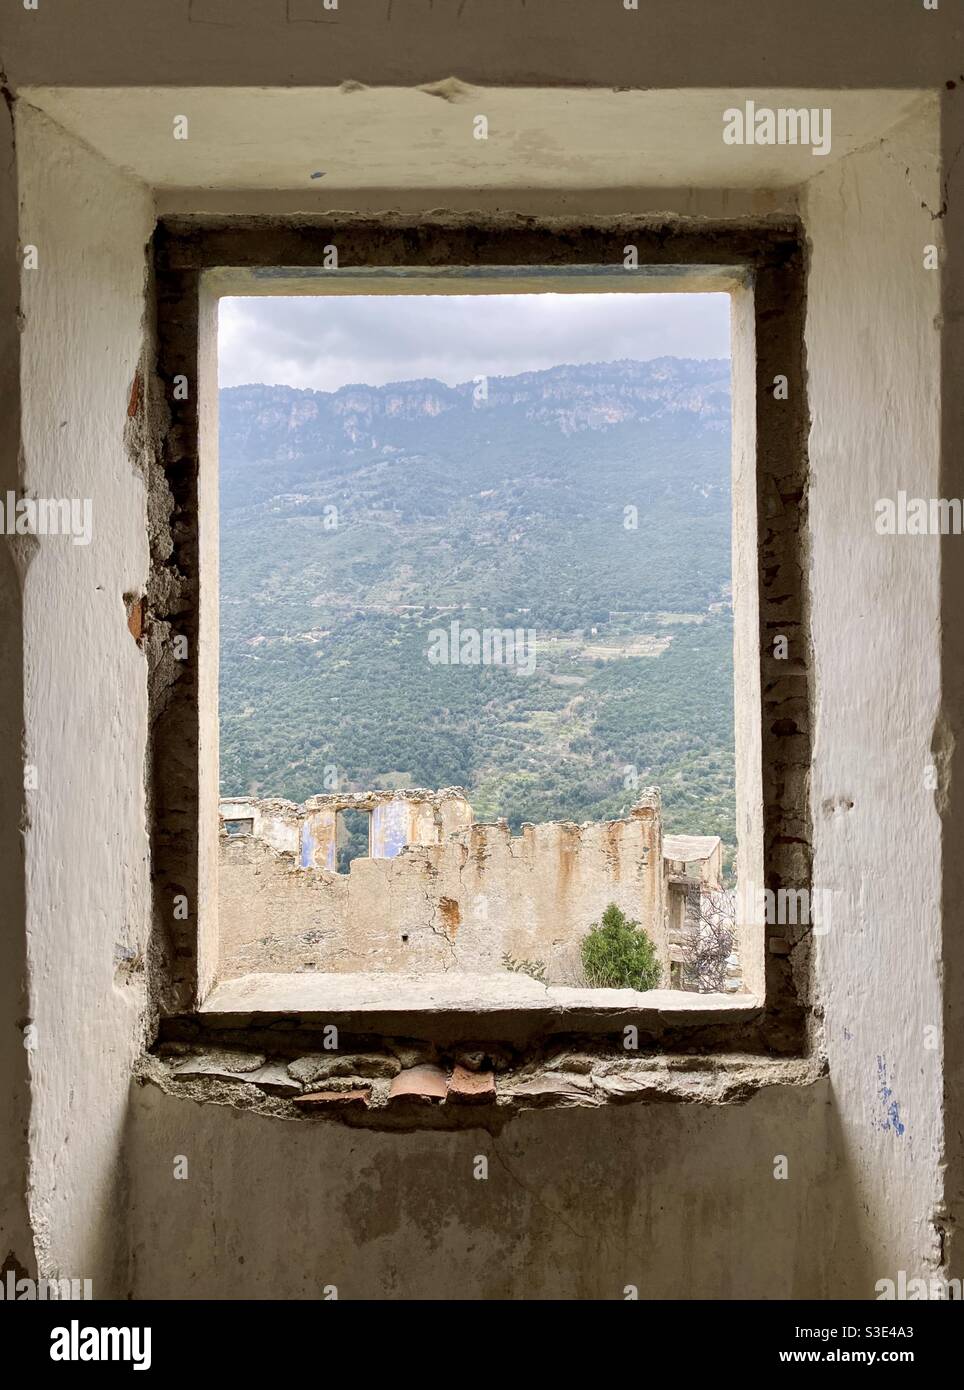 Panoramic view of an abandoned building and green mountains (known as “tacchi”) in the background, from a window of a dismissed and abandoned house of Gairo vecchio ghost town, in Sardinia, Italy. Stock Photo